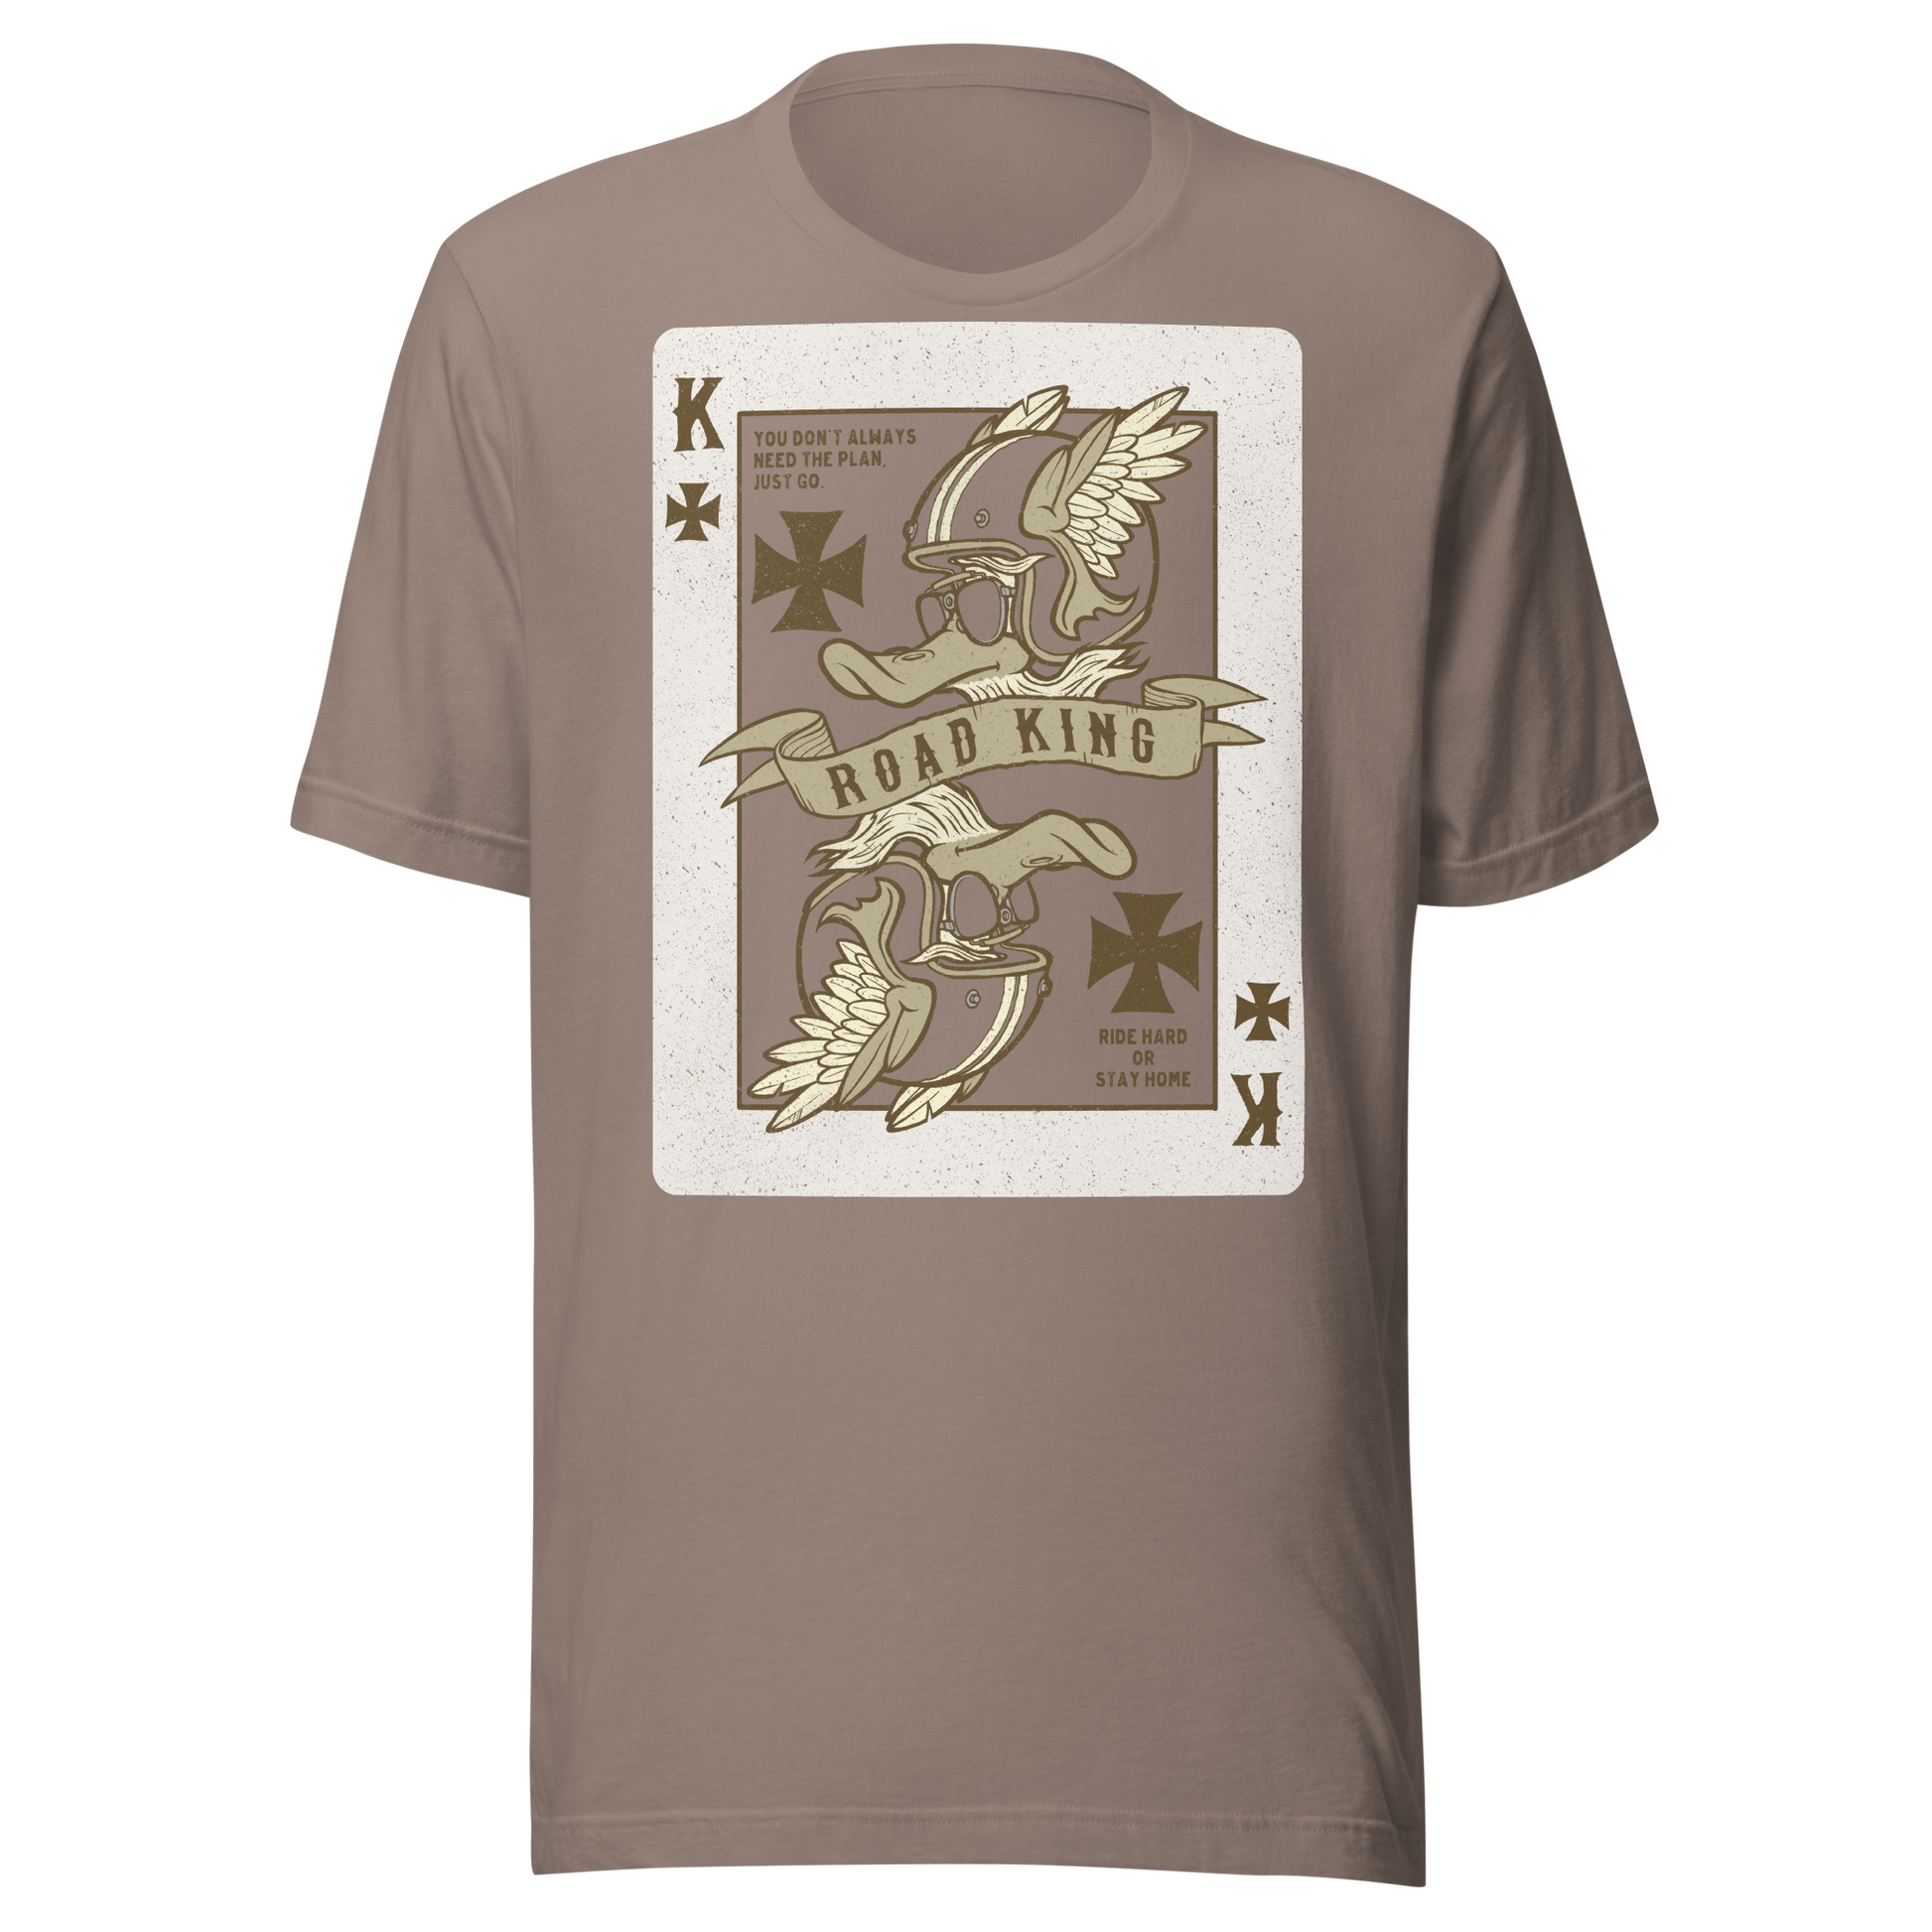 This Road King Motorcycle t-shirt is everything you've dreamed of and more. It feels soft and lightweight, with the right amount of stretch. It's comfortable and flattering for all.